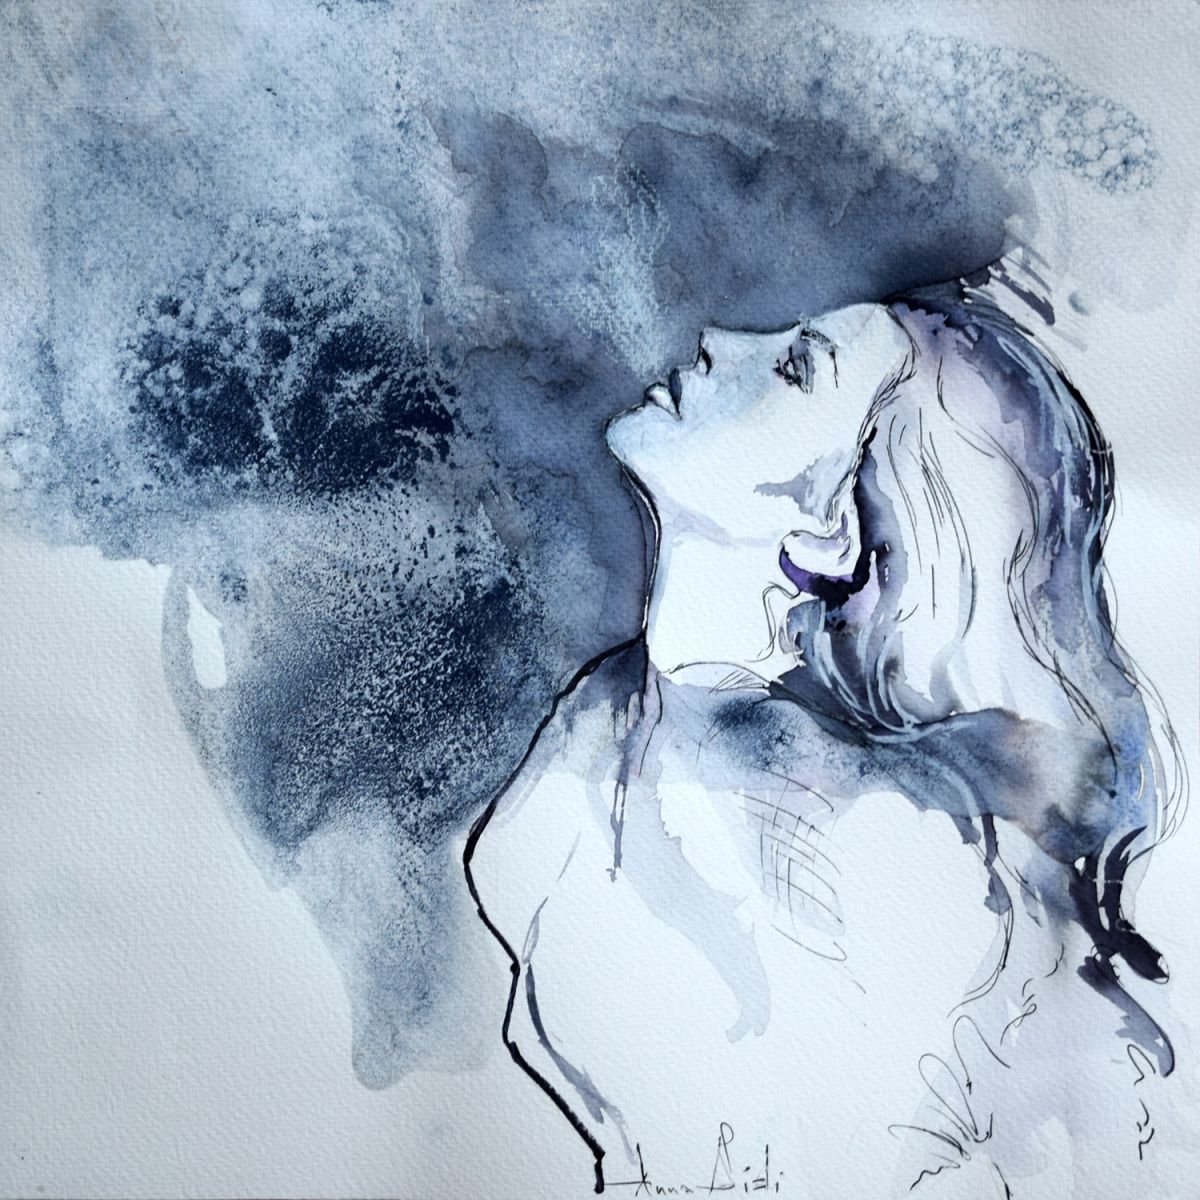 Breathe / Ink on paper (2017) by Anna Sidi-Yacoub